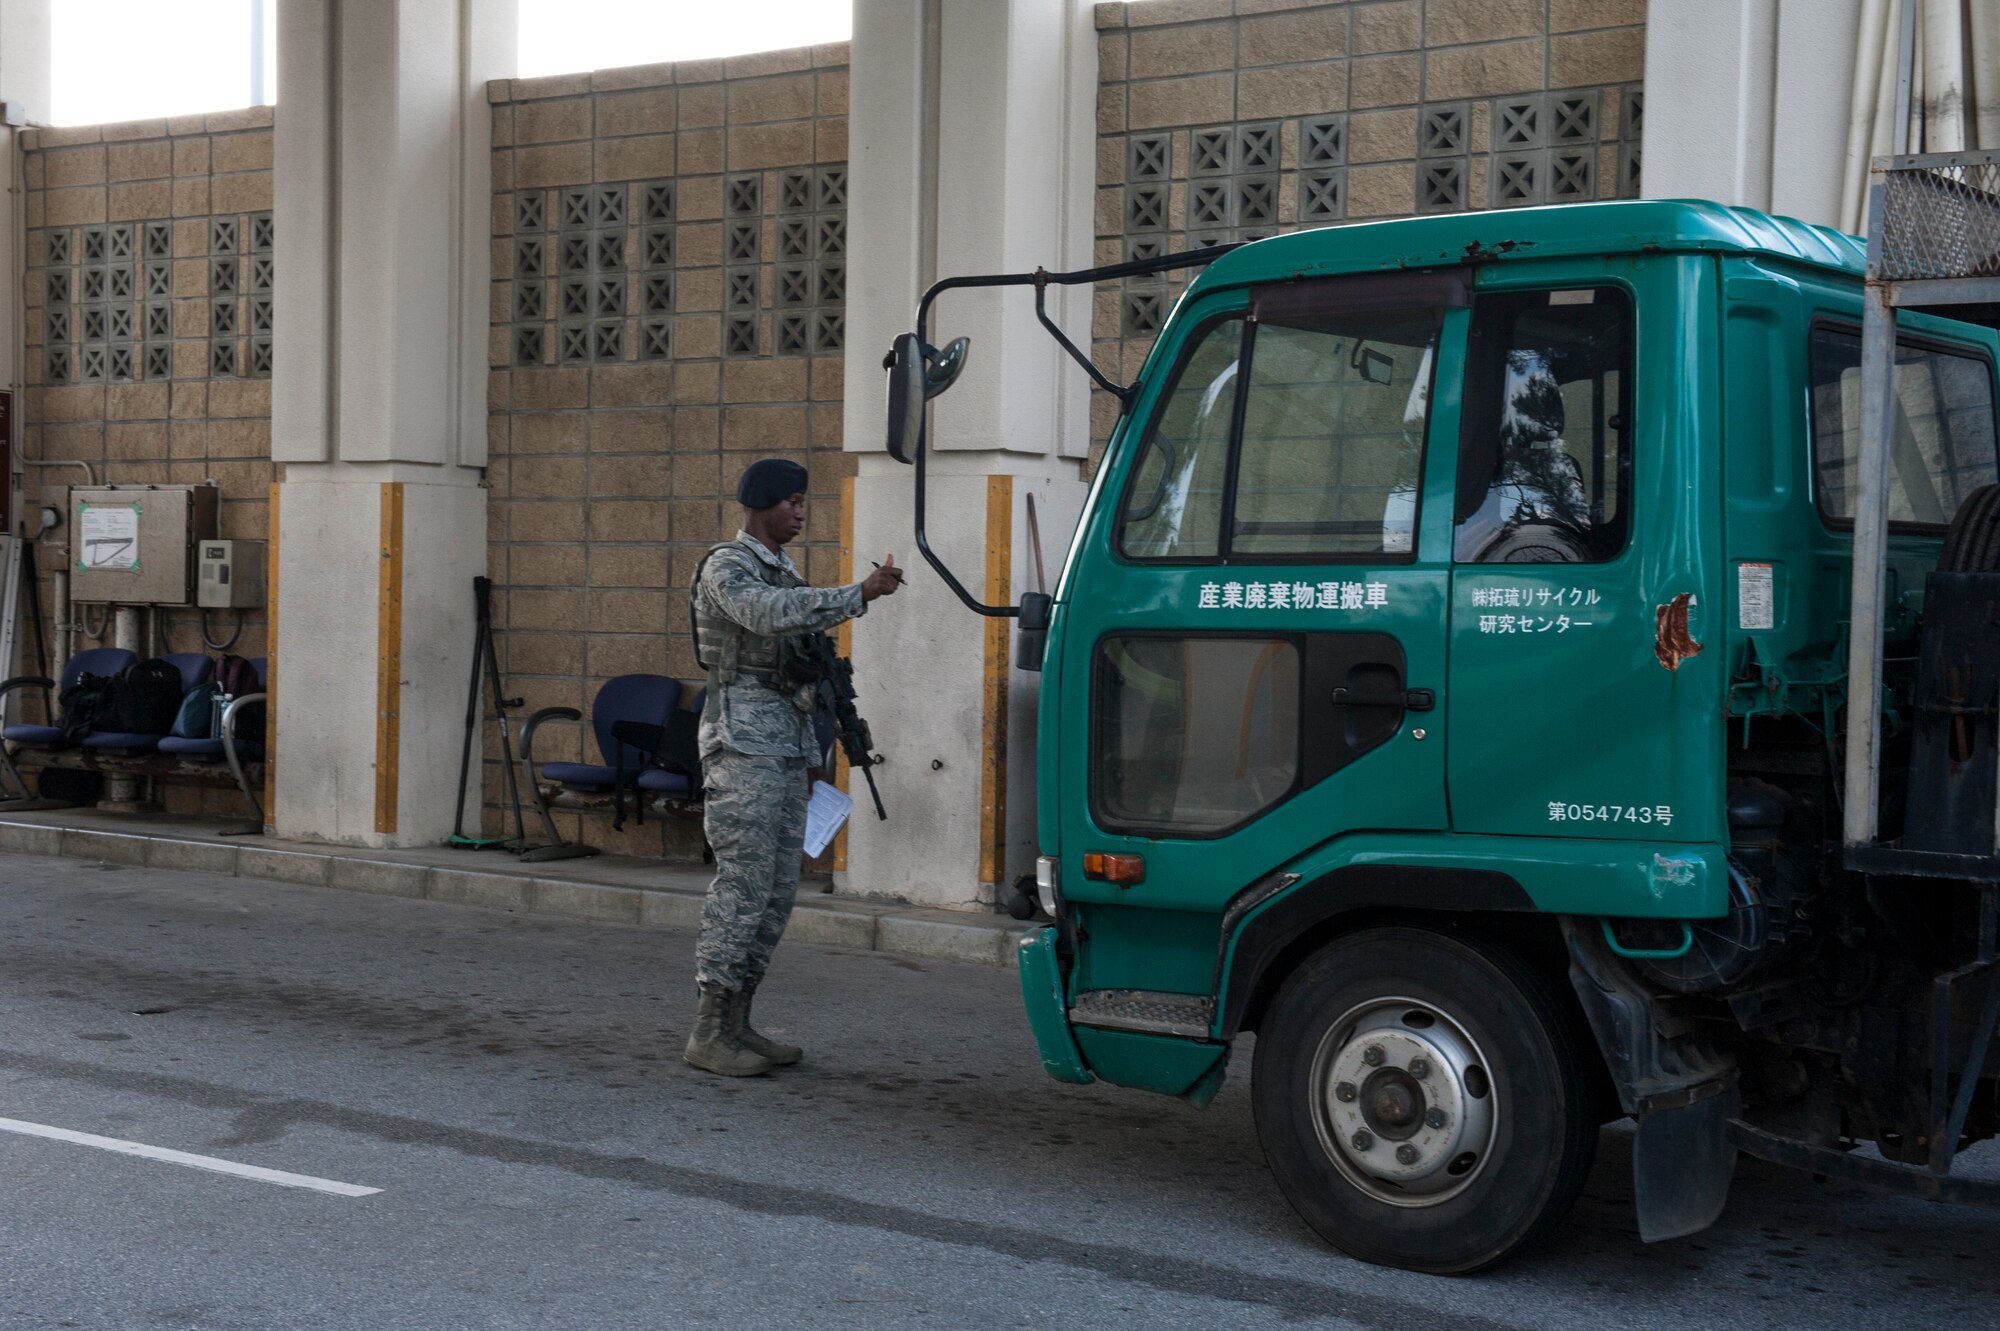 U.S. Air Force Airman 1st Class Alvin Stewart, 18th Security Forces Squadron response force member, directs a truck to a search pit at Kadena Air Base, Japan, Nov. 10, 2015. The SFS opened an extra lane for commercial trucks to enter and be searched in order to decrease traffic congestion on Highway 58. (U.S. Air Force photo by Airman 1st Class Lynette M. Rolen)